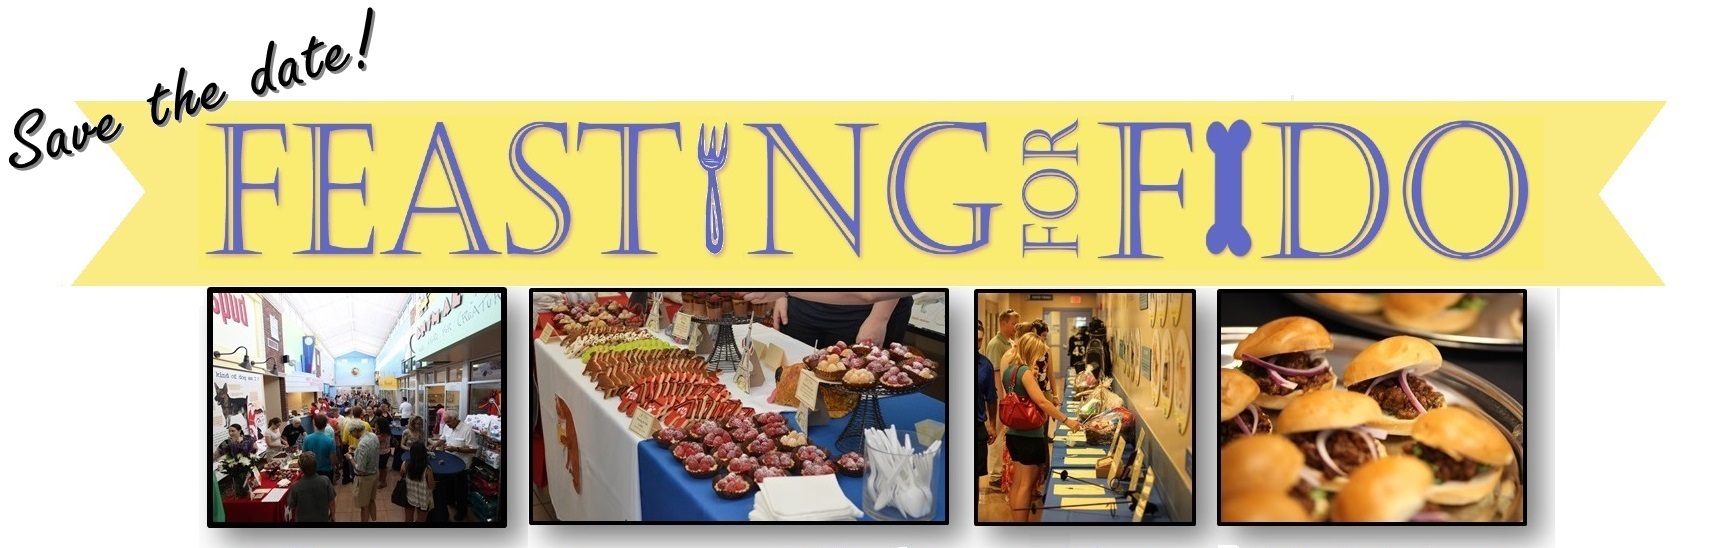 2018 Feasting for Fido: July 26